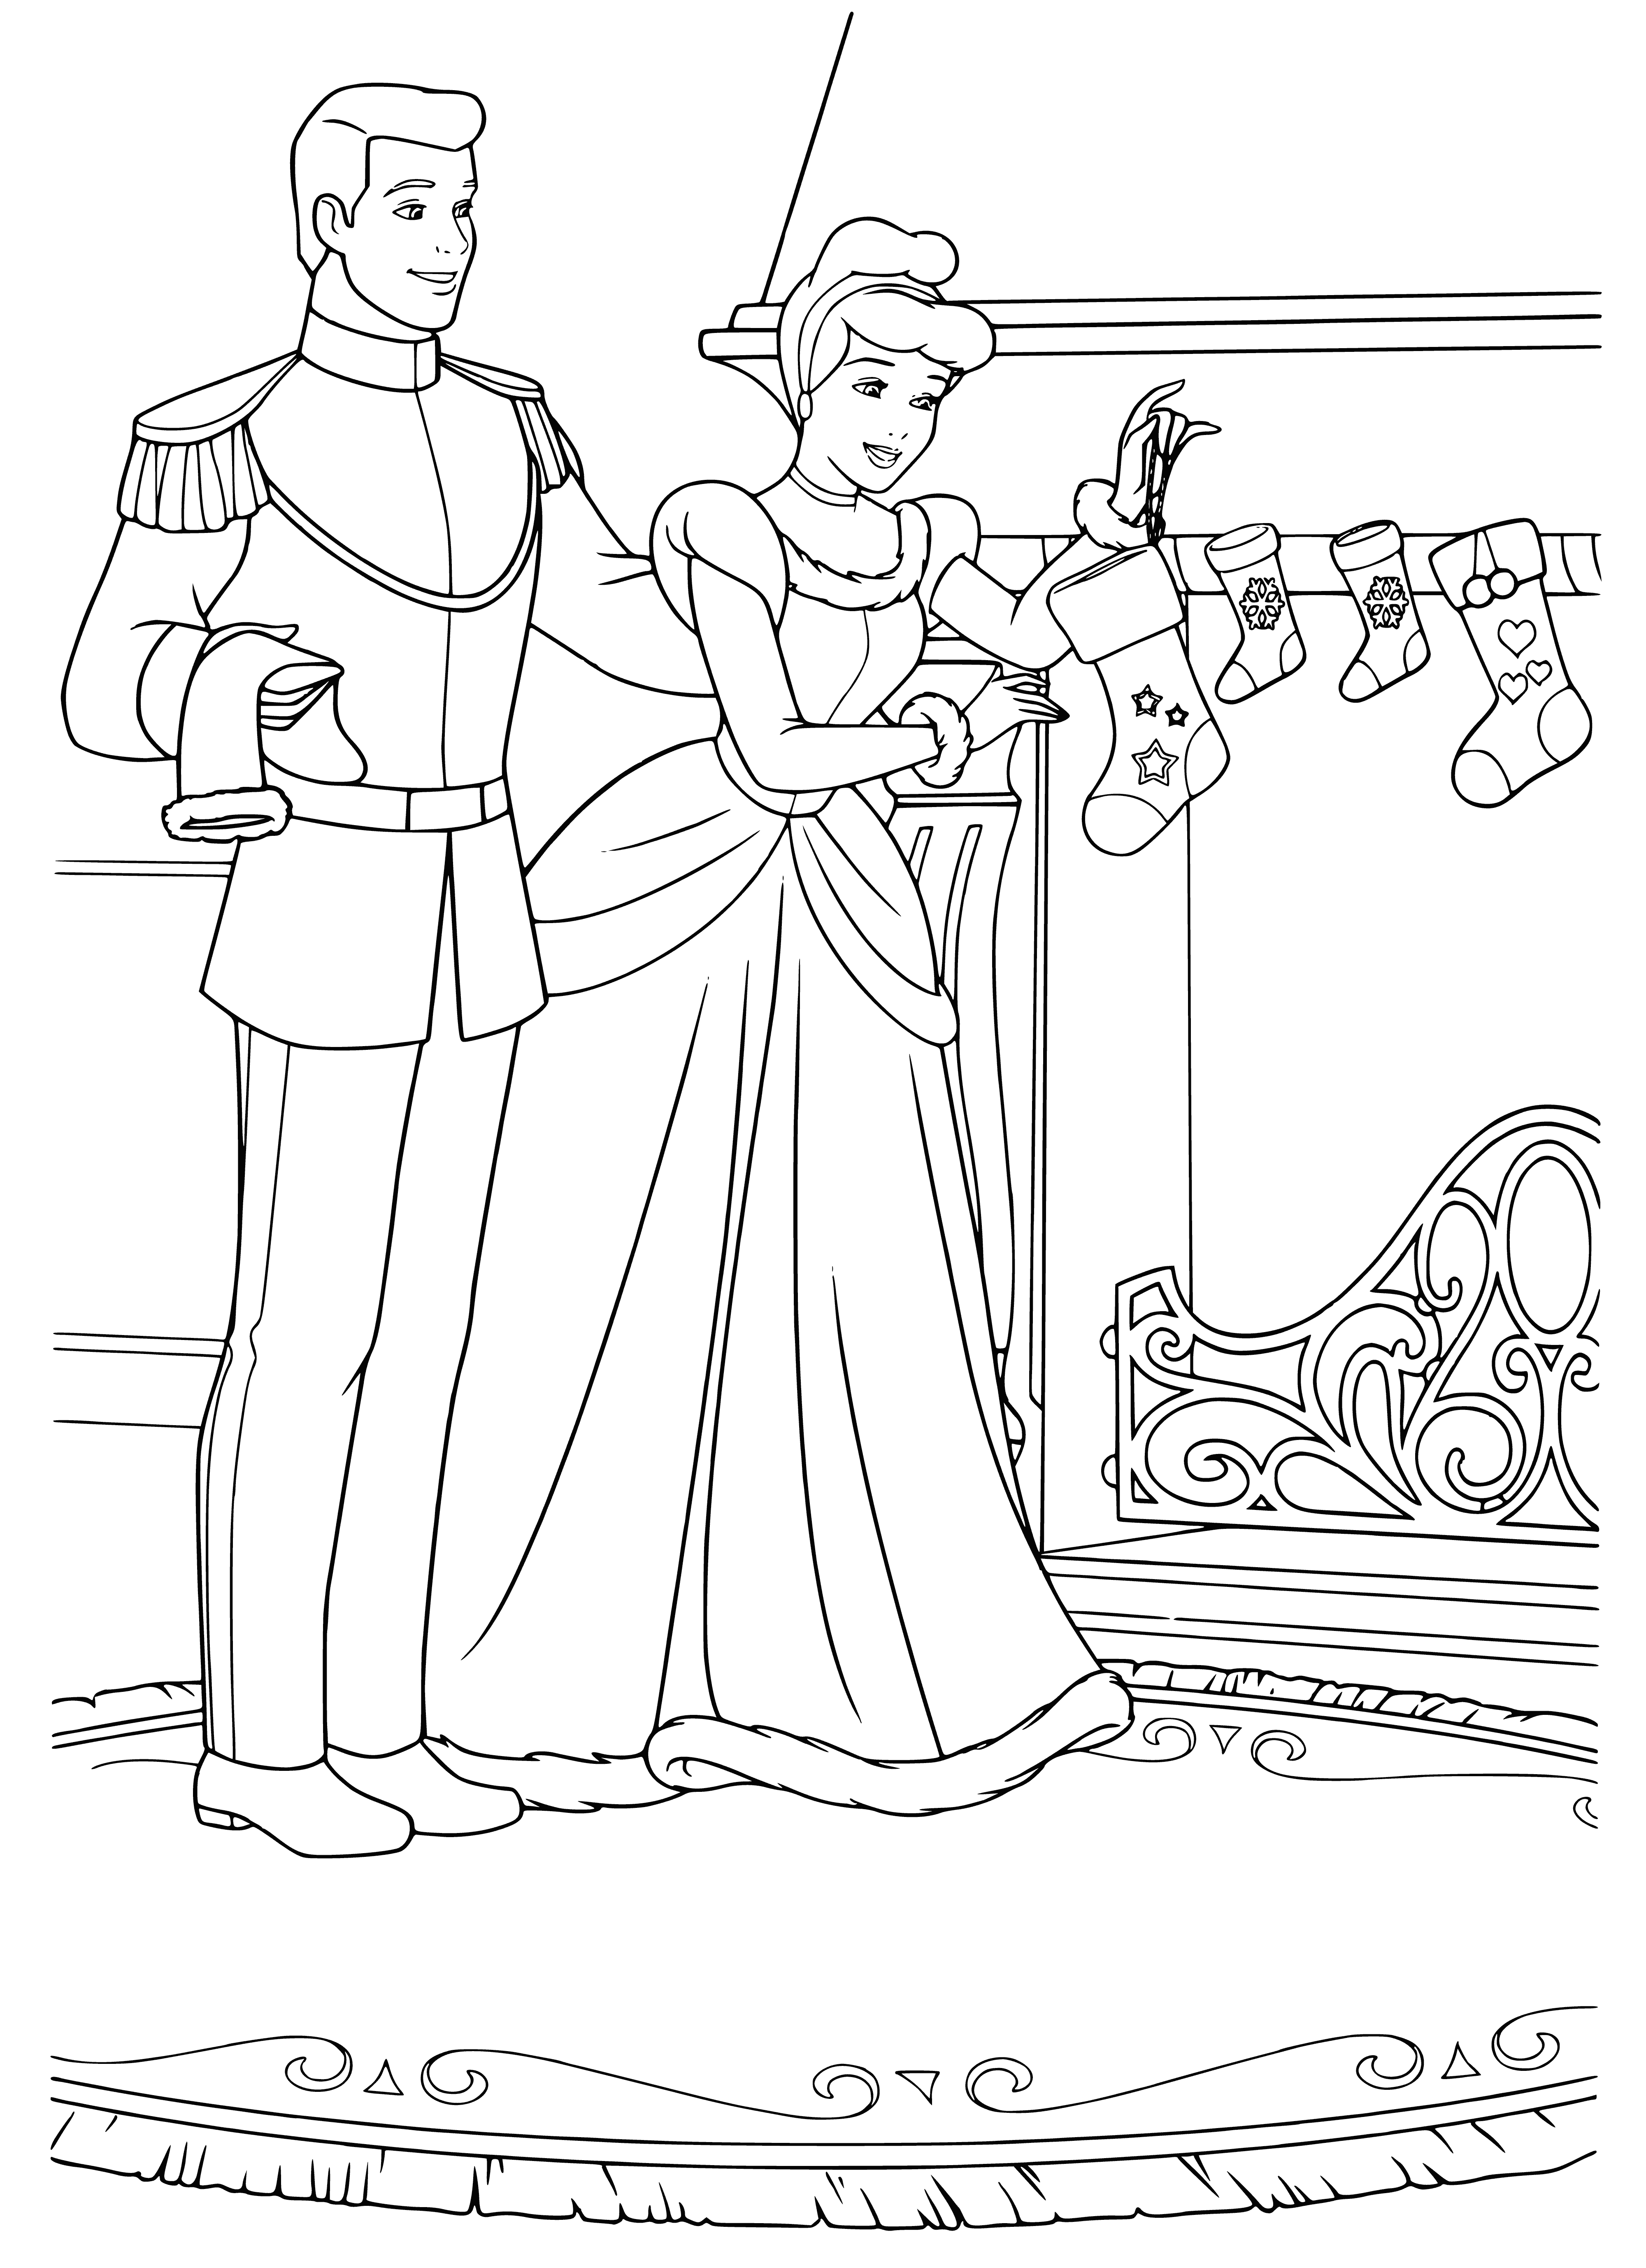 coloring page: Cinderella and her prince celebrate NYE by the fireplace in royal attire, sipping champagne & clearly in love.